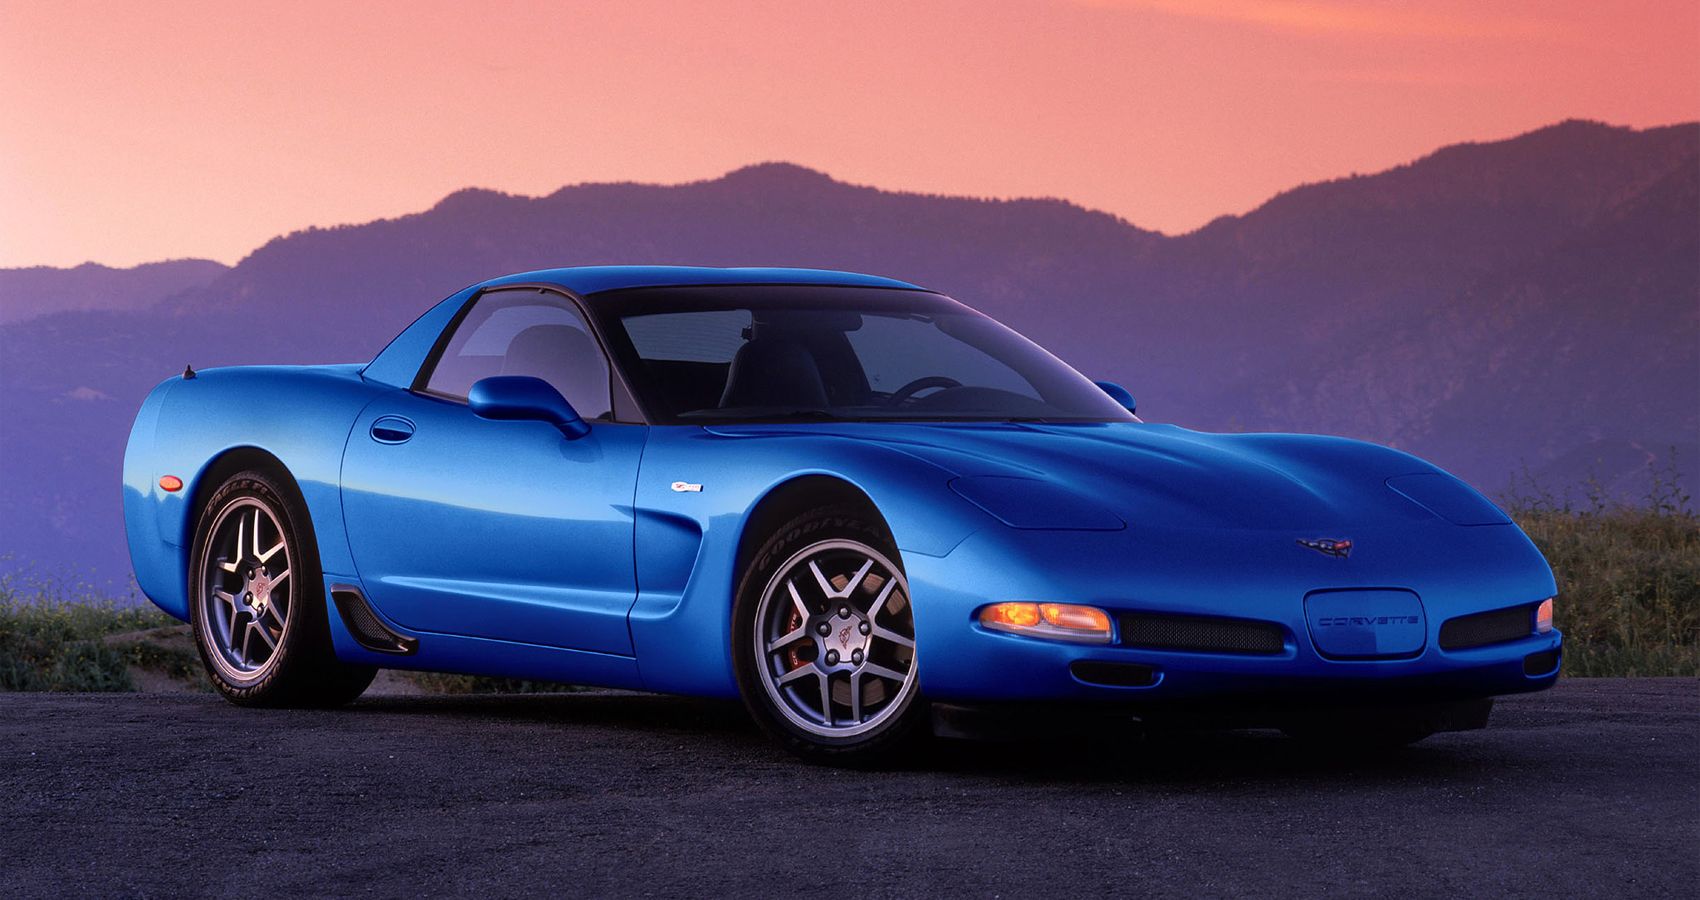 Front 3/4 view of the C5 Z06 in blue